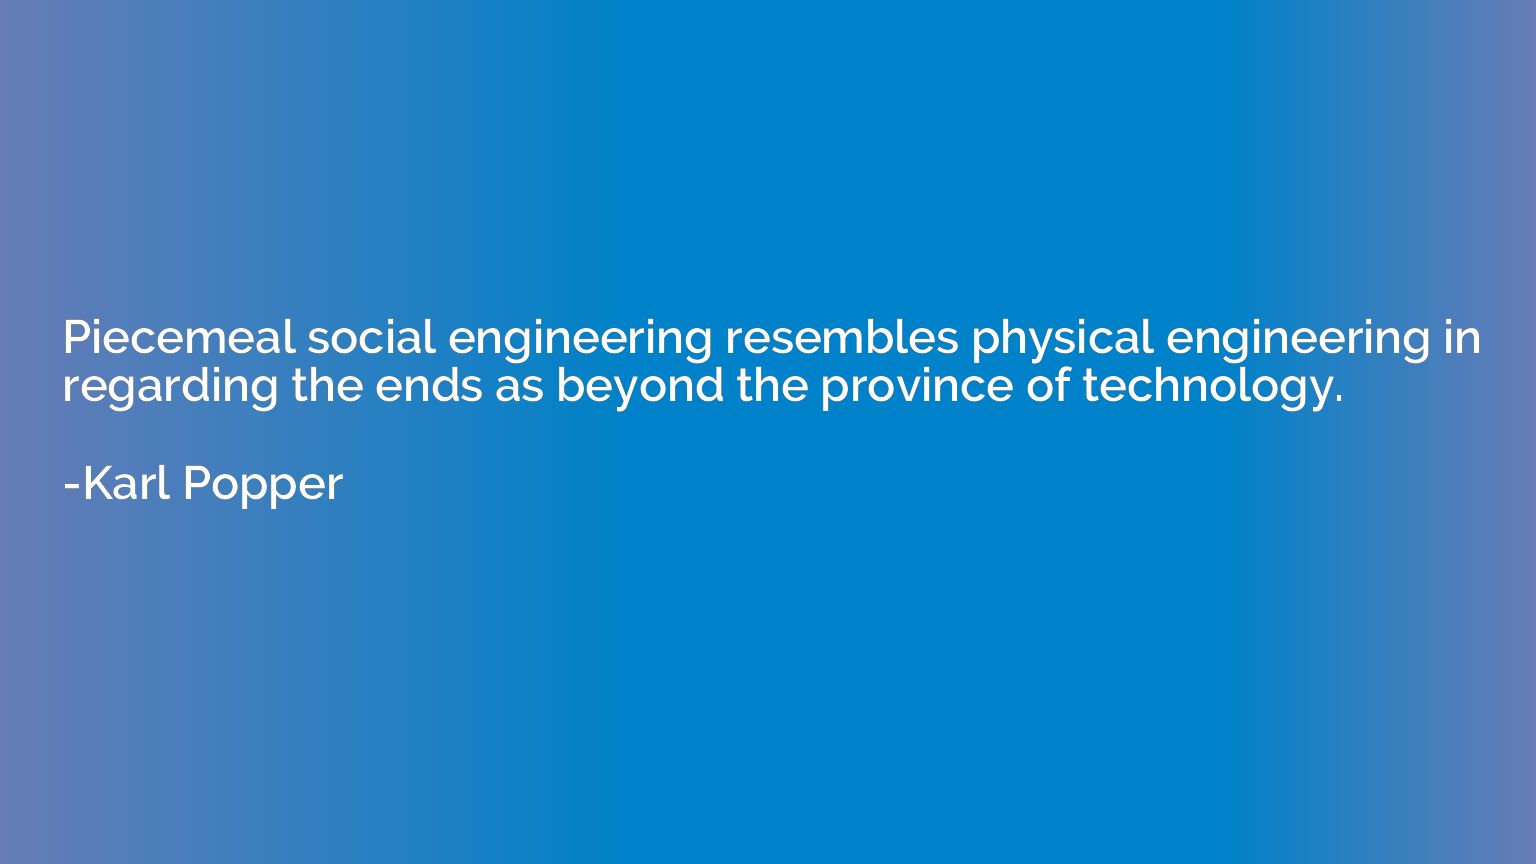 Piecemeal social engineering resembles physical engineering 